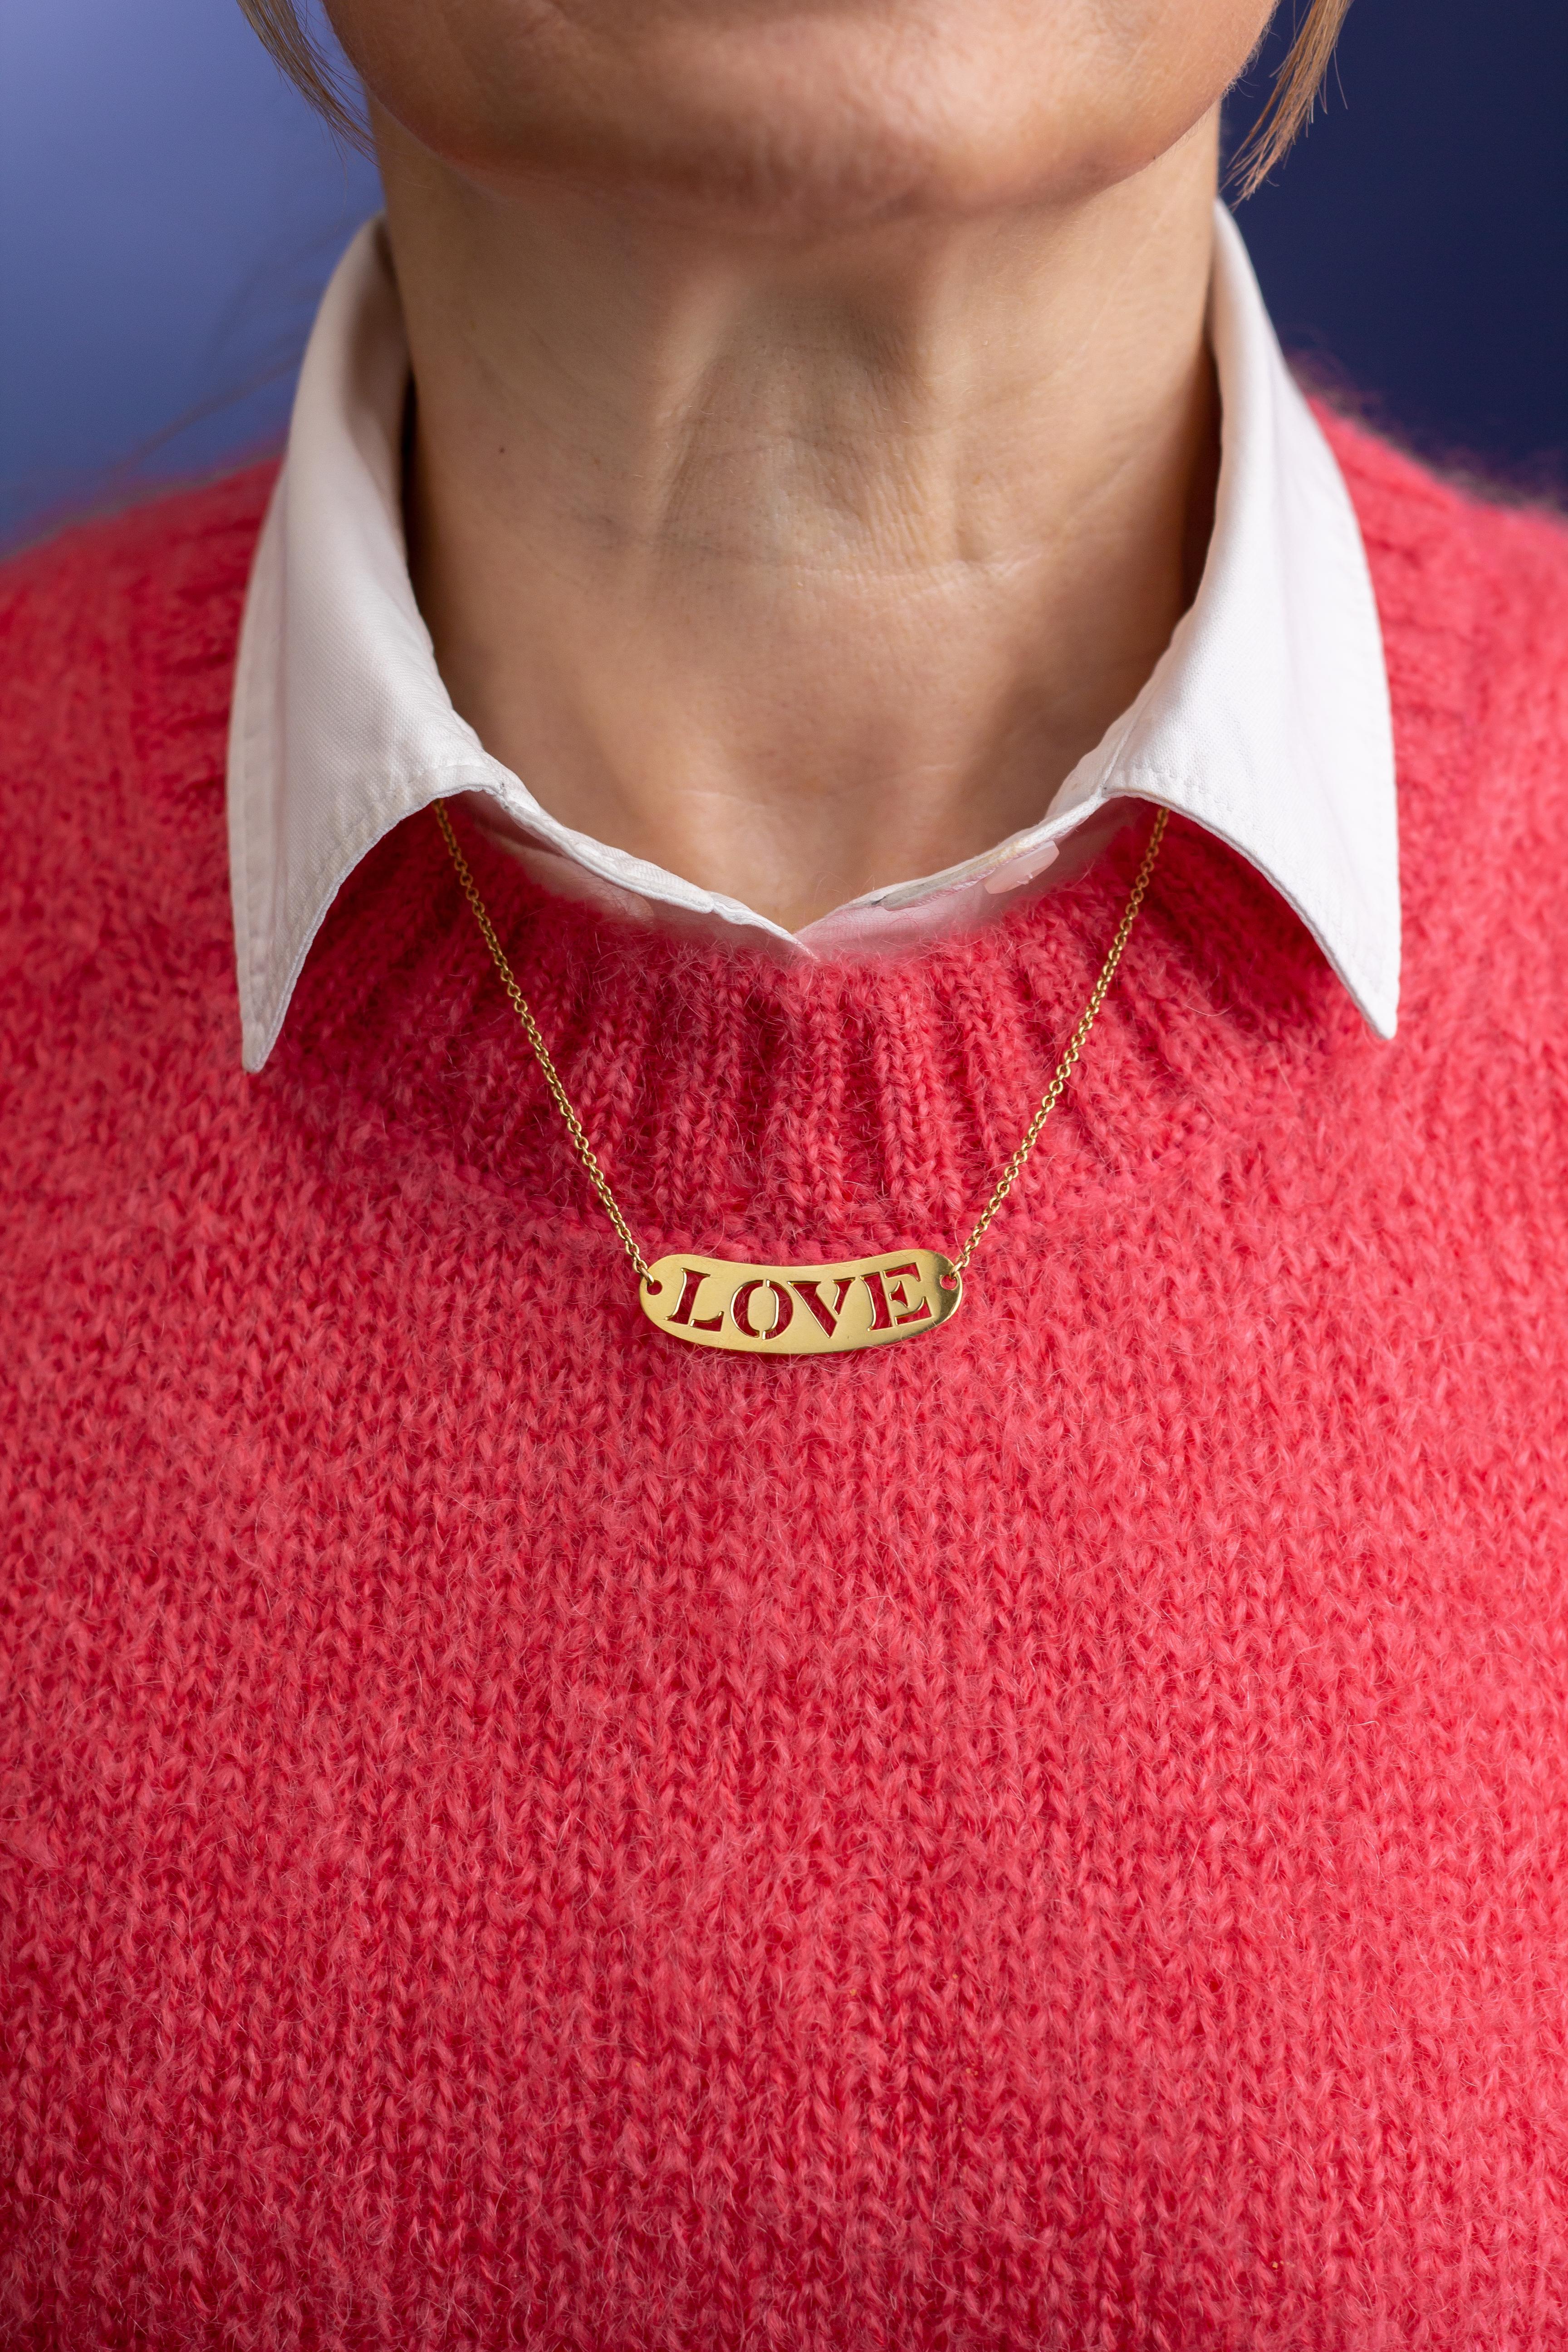 This sweet French necklace features a central plaque spelling 'love' and has been crafted from 18 karat yellow gold. The fine chain necklace centres on an oval yellow gold plaque that has been pierced to reveal the word 'love' which makes it a